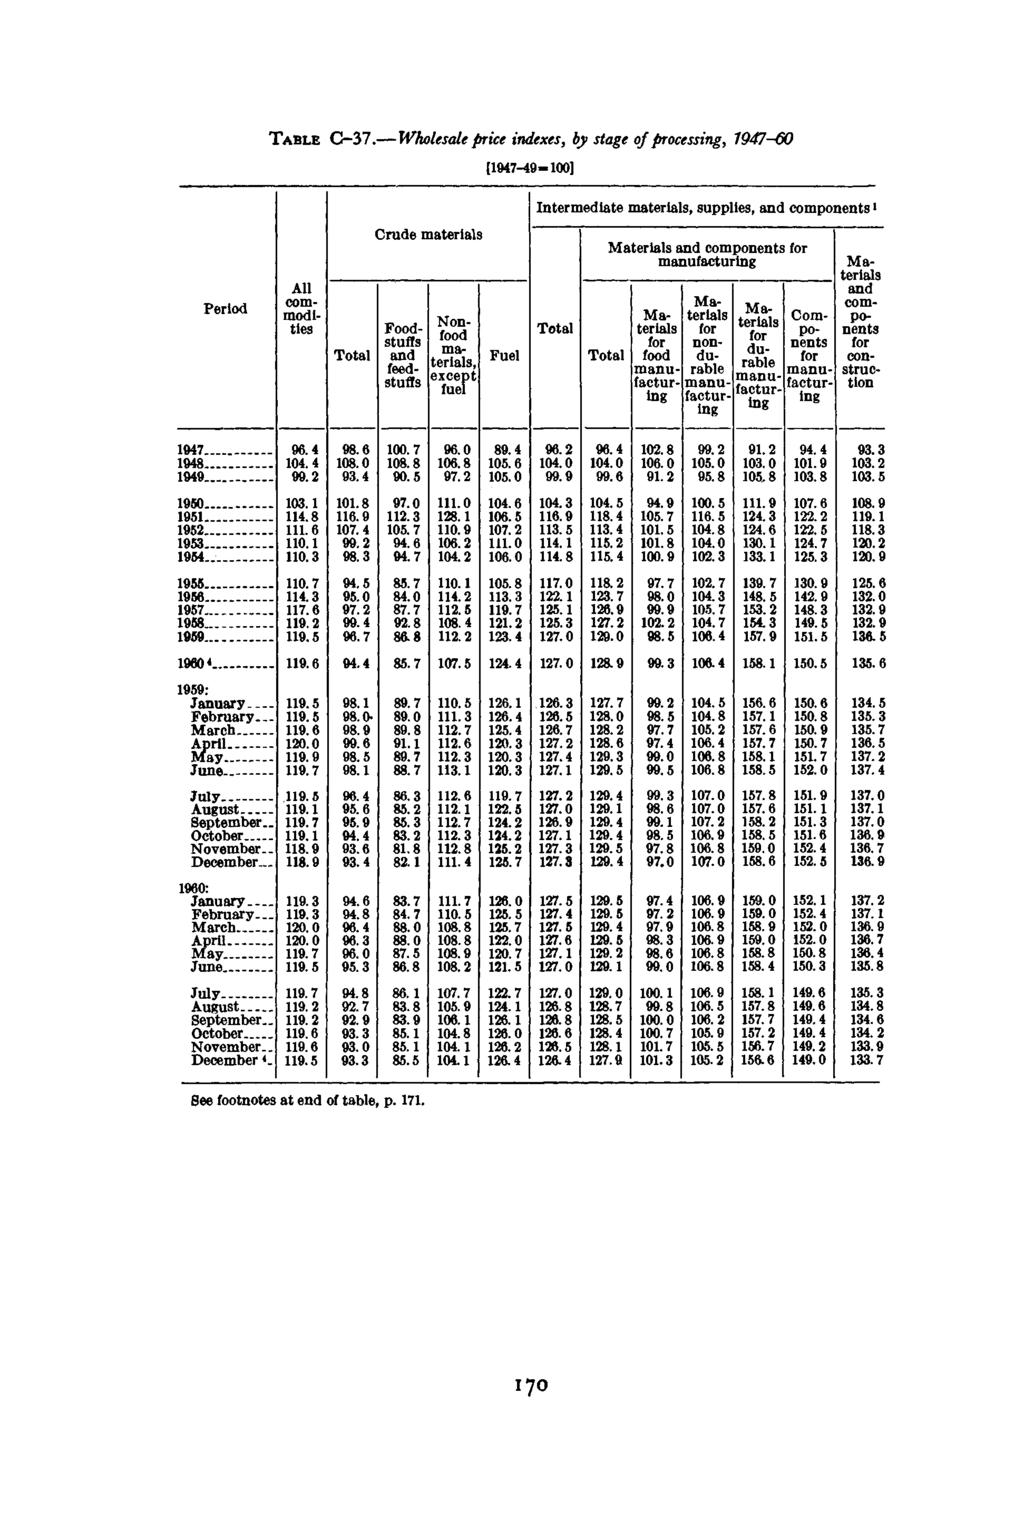 TABLE C 7. Wholesale price indexes, by stage of processing, -6 [-49=1] Period 1948. - 195. _ 1959 196«1959: November.. December 196:... November.. December *. All commodities 14.4 1.1 111.6 11. 11.7 114.